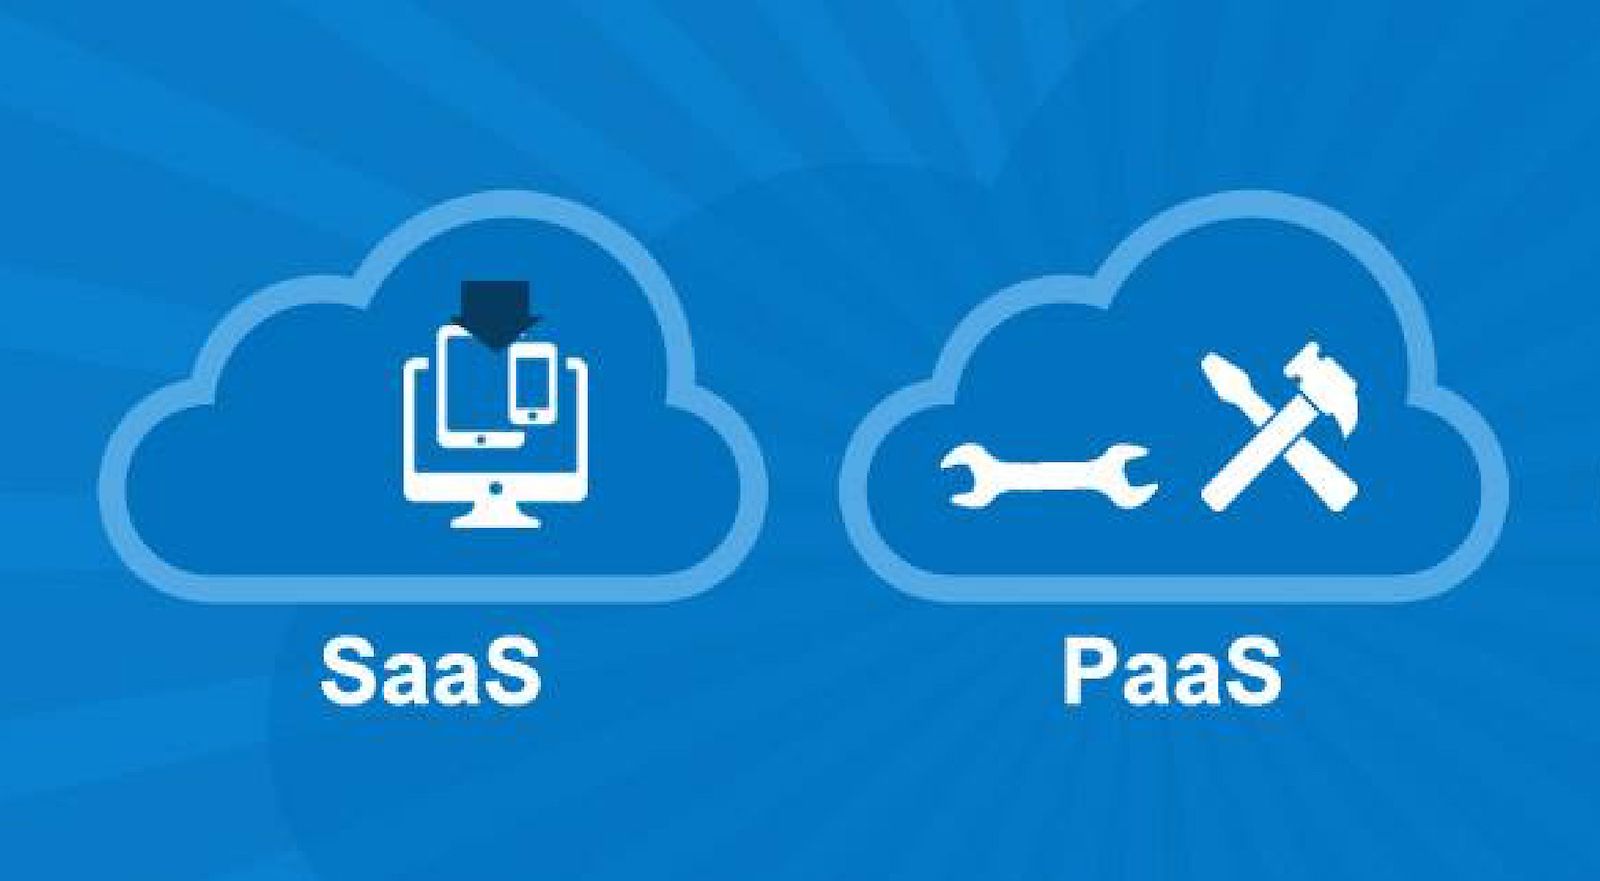 PaaS and SaaS can help build your MVP